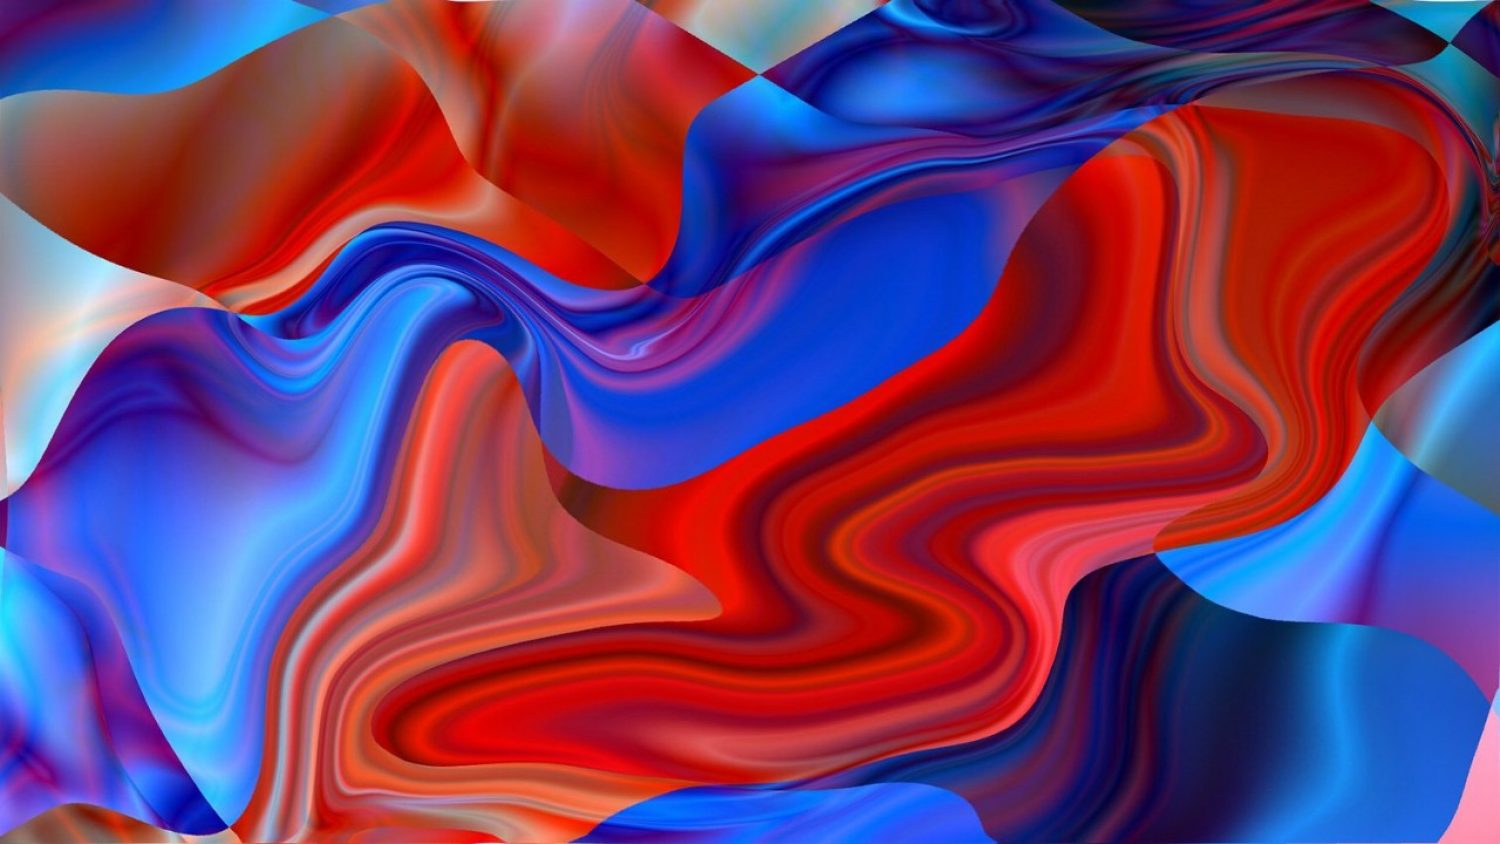 An abstract red and blue image